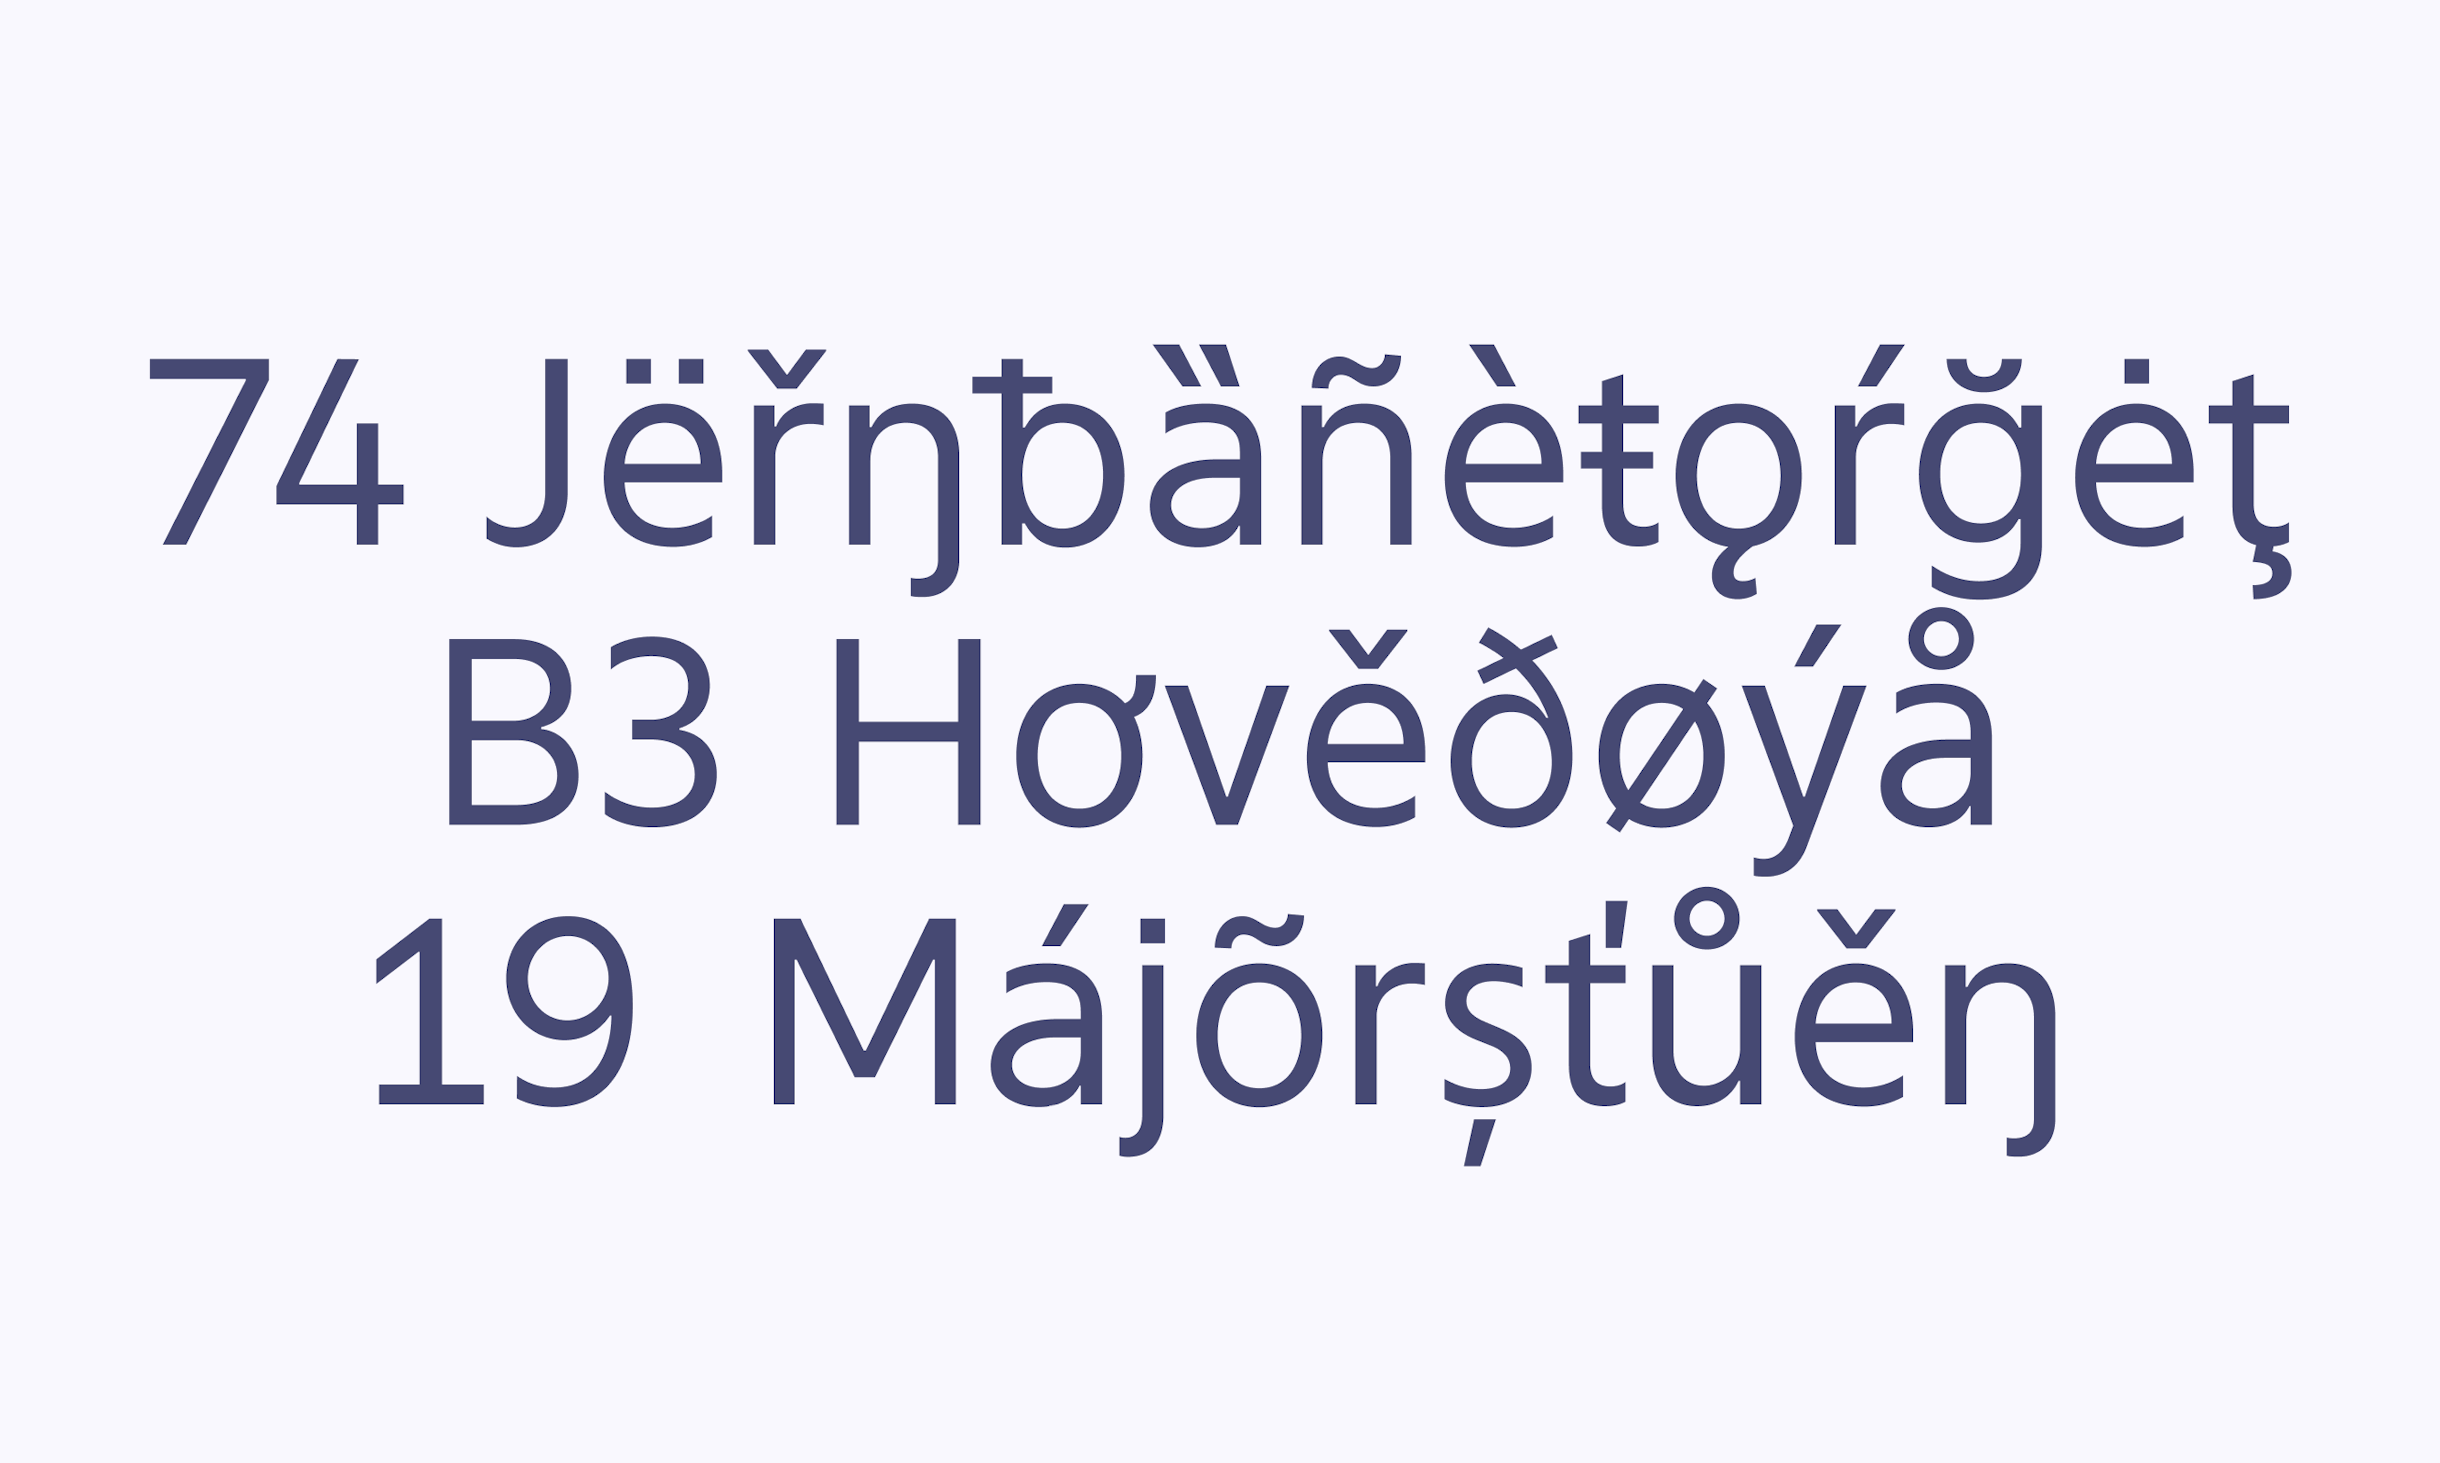 Showcase of the custom typeface designed for the Ruter app